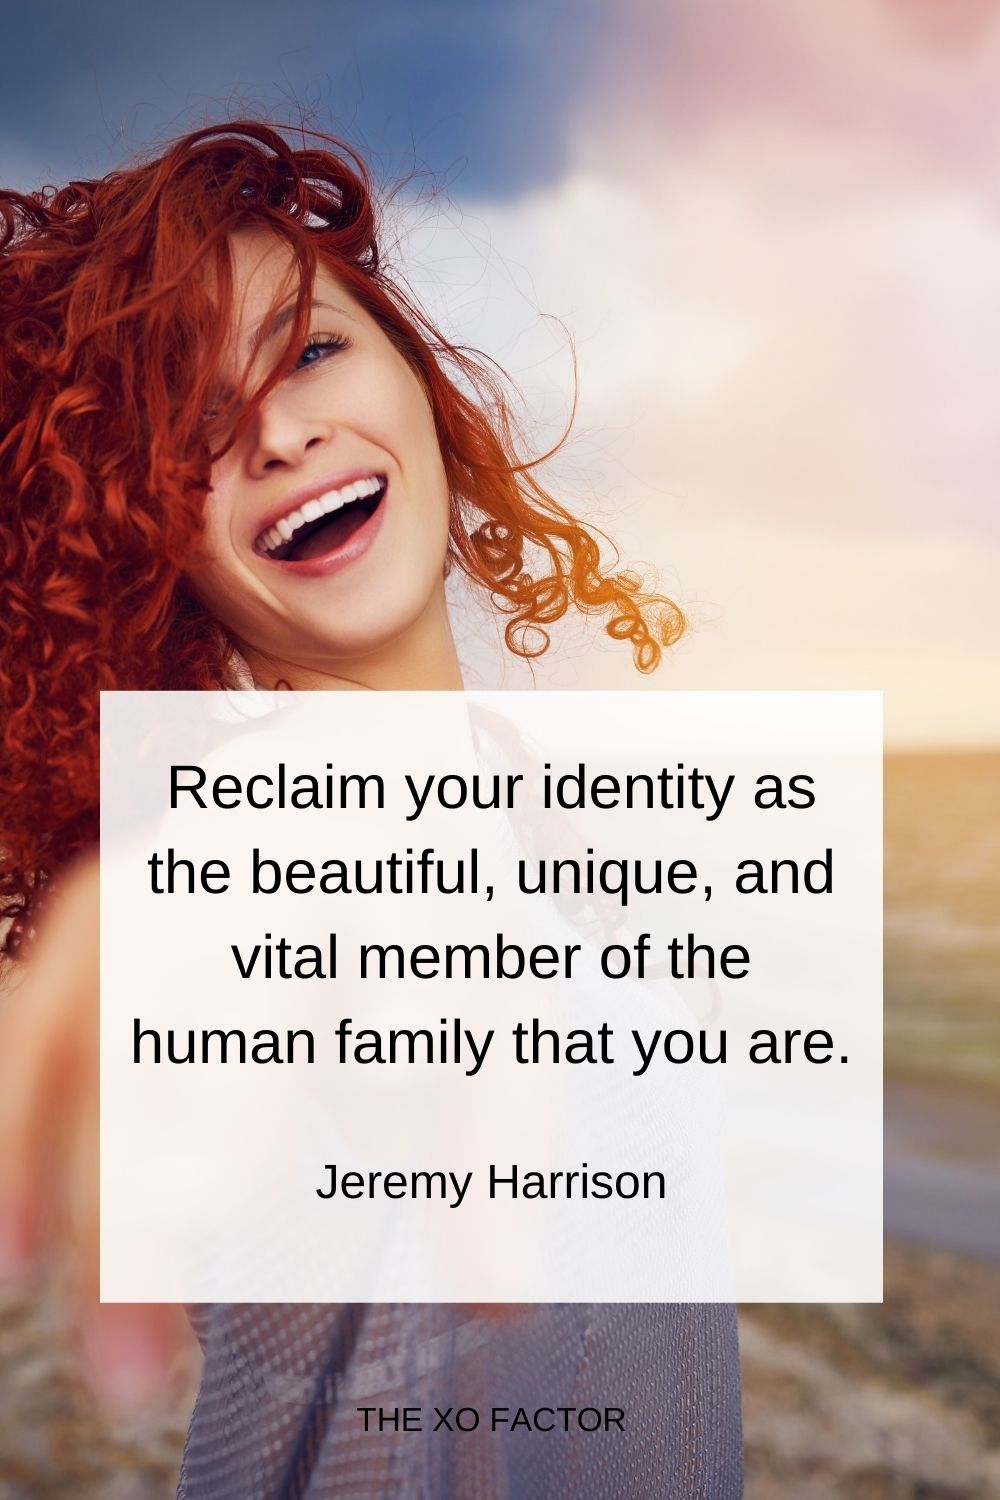 Reclaim your identity as the beautiful, unique, and vital member of the human family that you are.  Jeremy Harrison